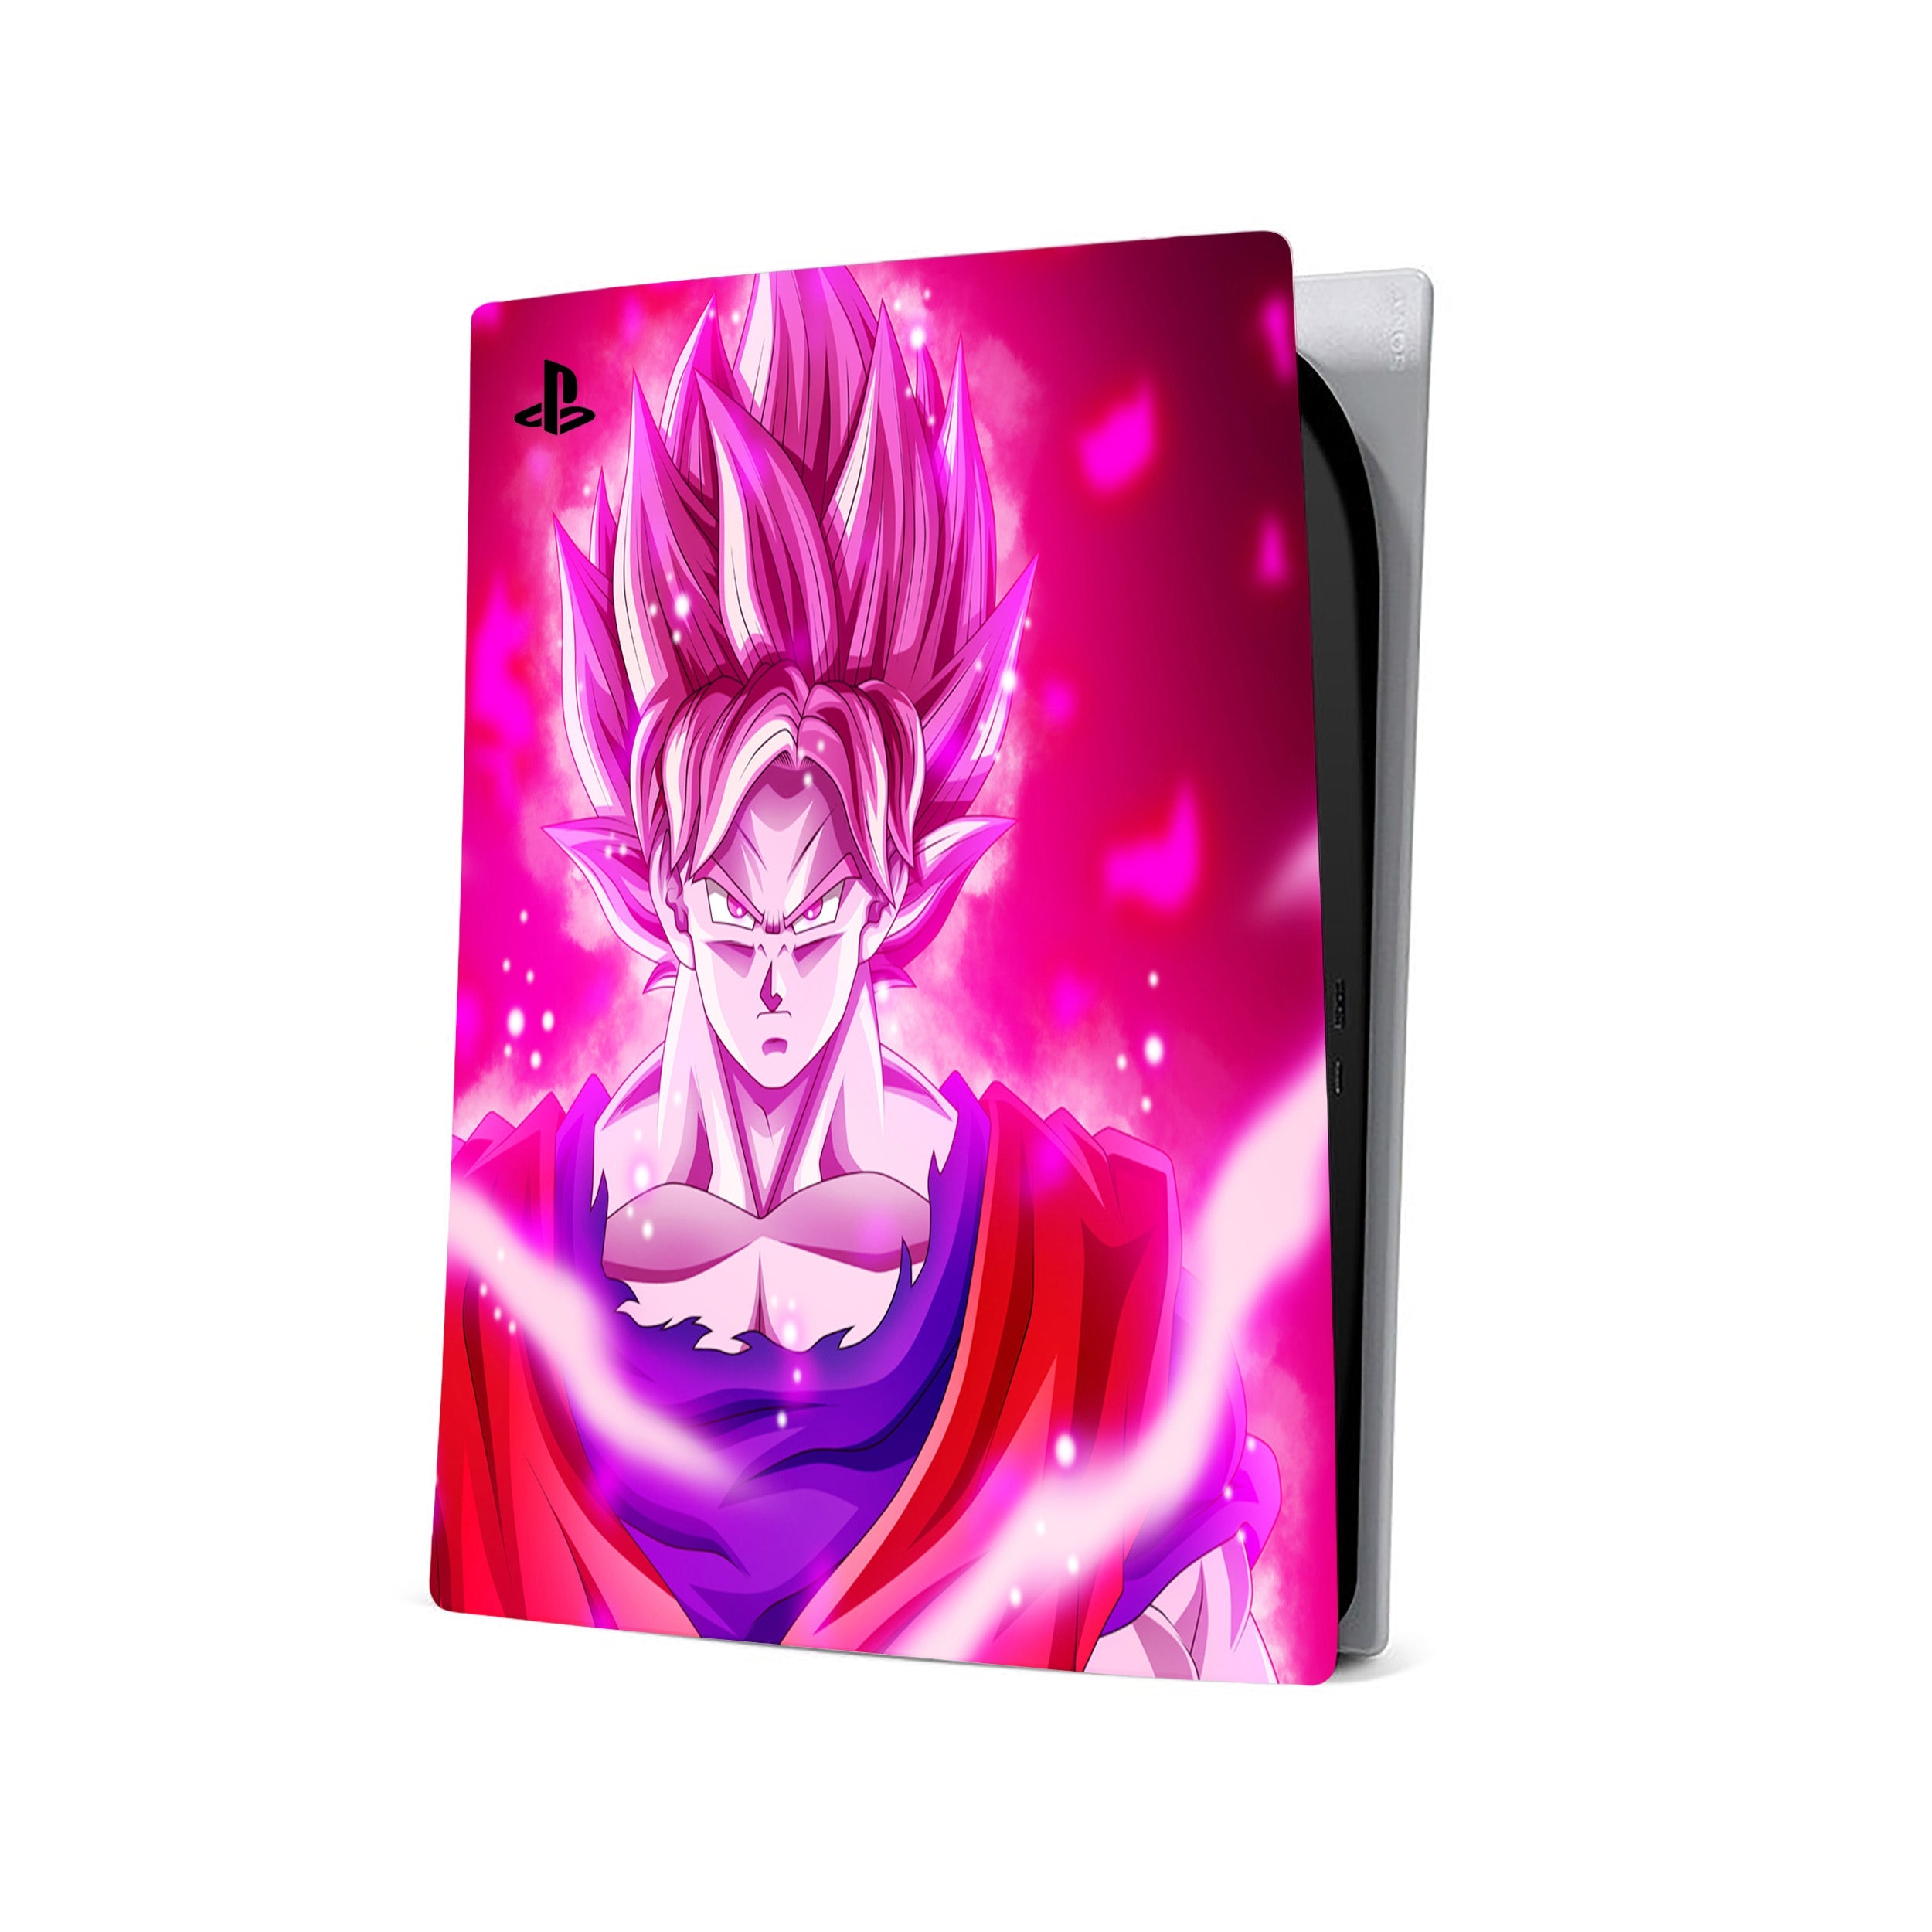 A video game skin featuring a Dragon Ball Z Goku design for the PS5.